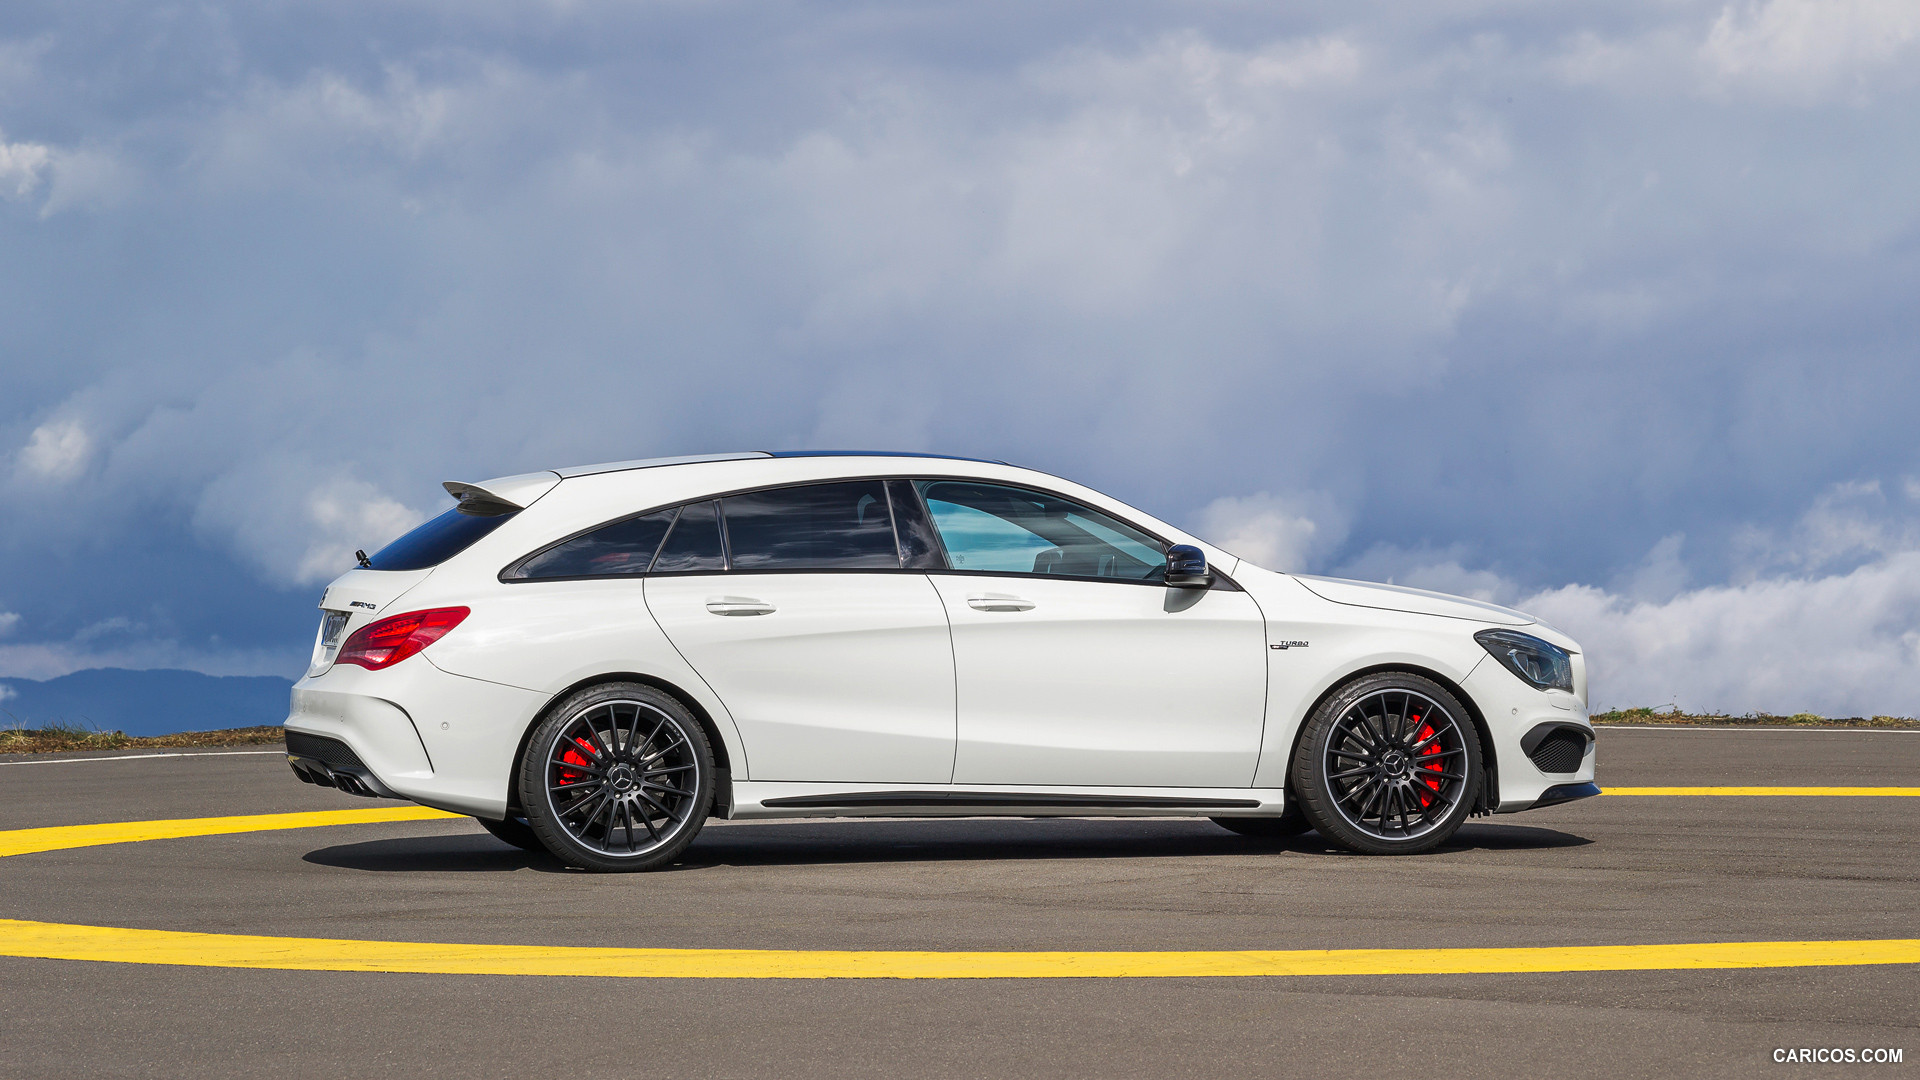 2015 Mercedes-Benz CLA 45 AMG Shooting Brake (Calcite White) - Side, #19 of 70